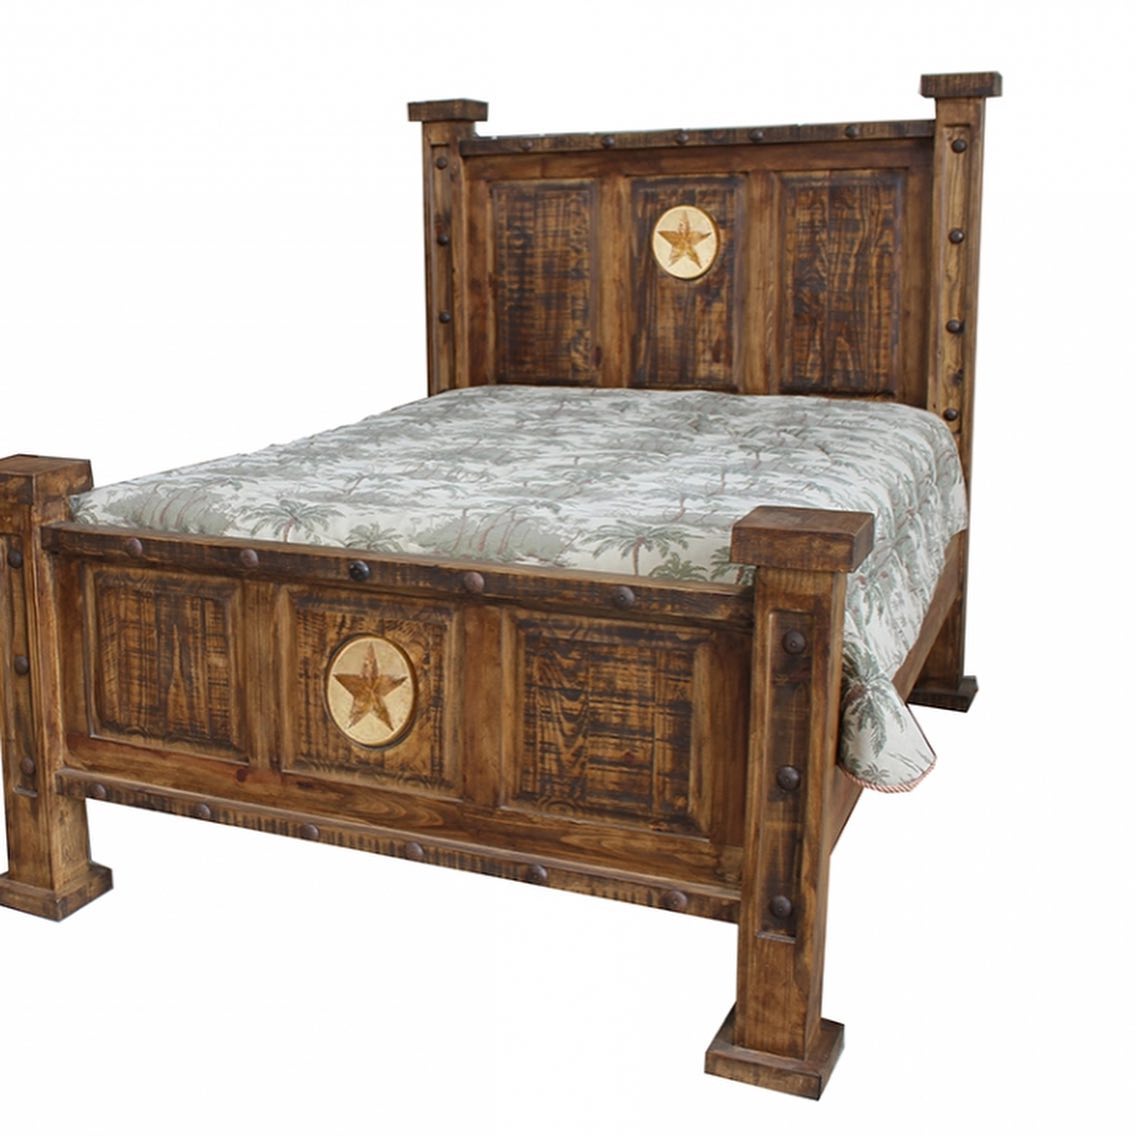 Laredo Rustic Bedroom Collection with Marble Star